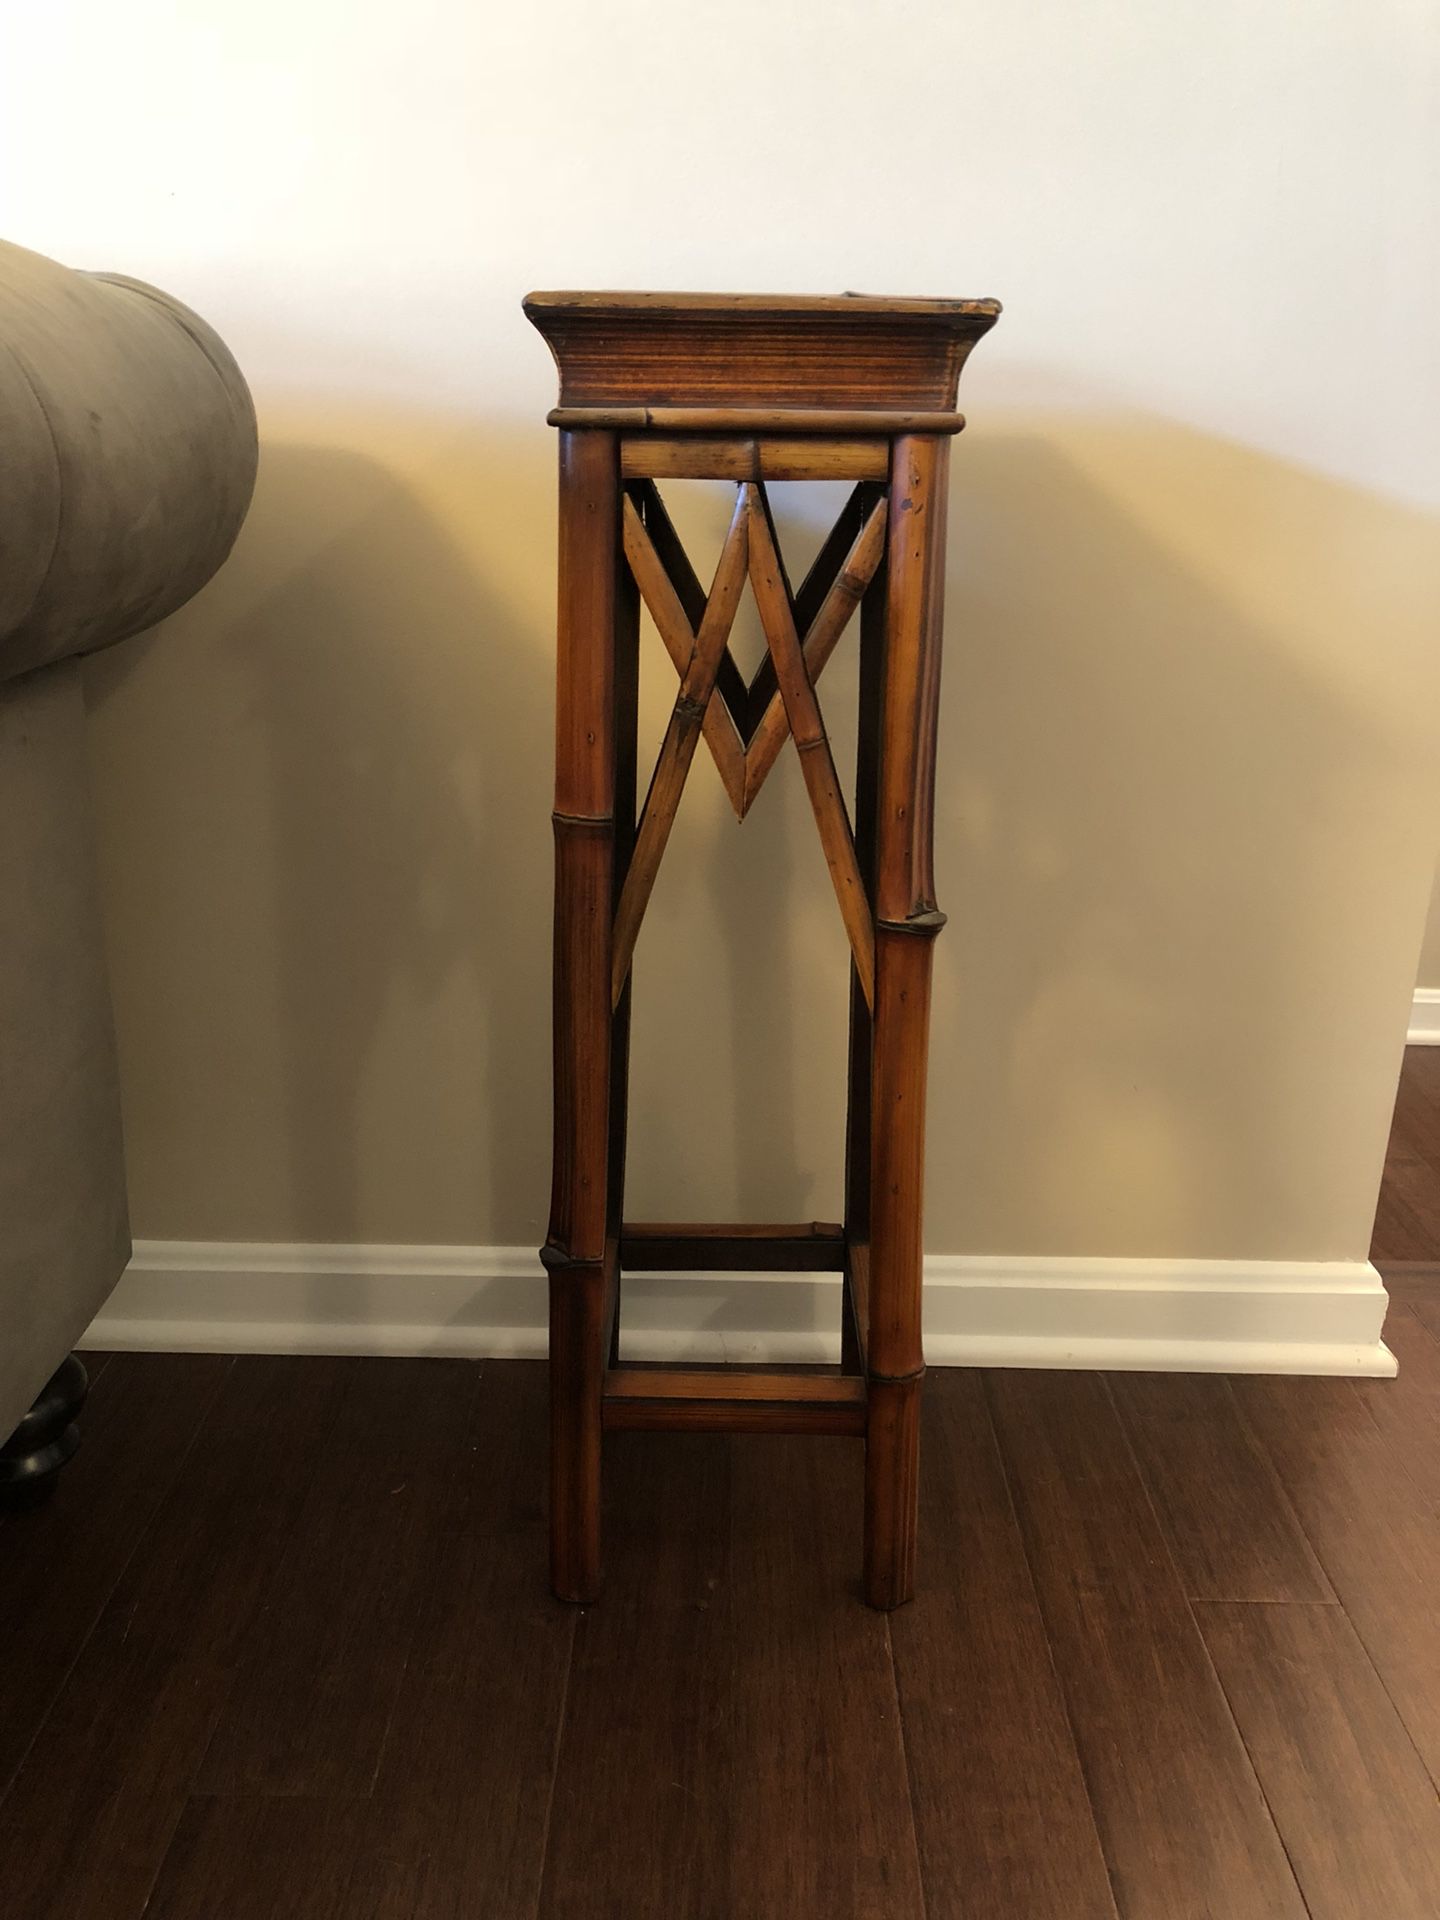 Plant stand 30” tall x 9” wide